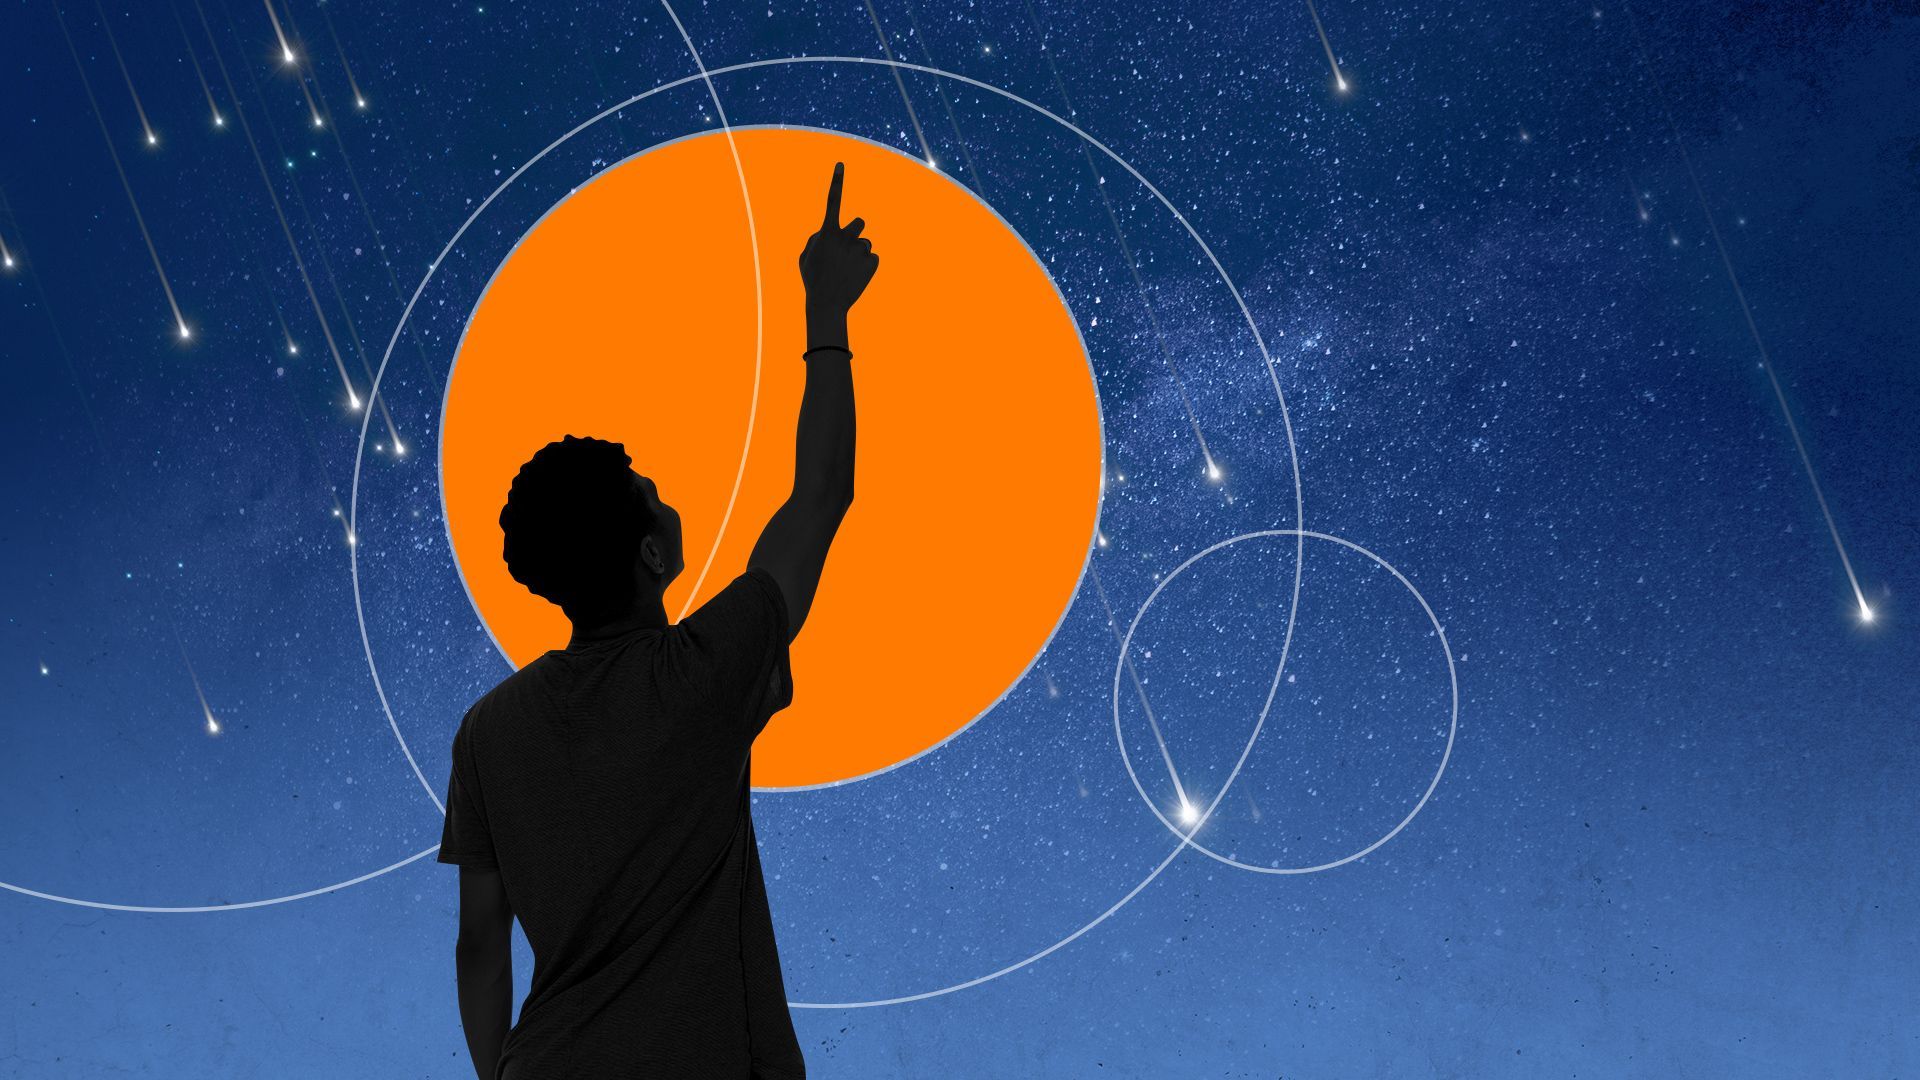 Illustrated collage of a person pointing up at the sky showing a meteor shower on a starry background surrounded by circles and orbits.